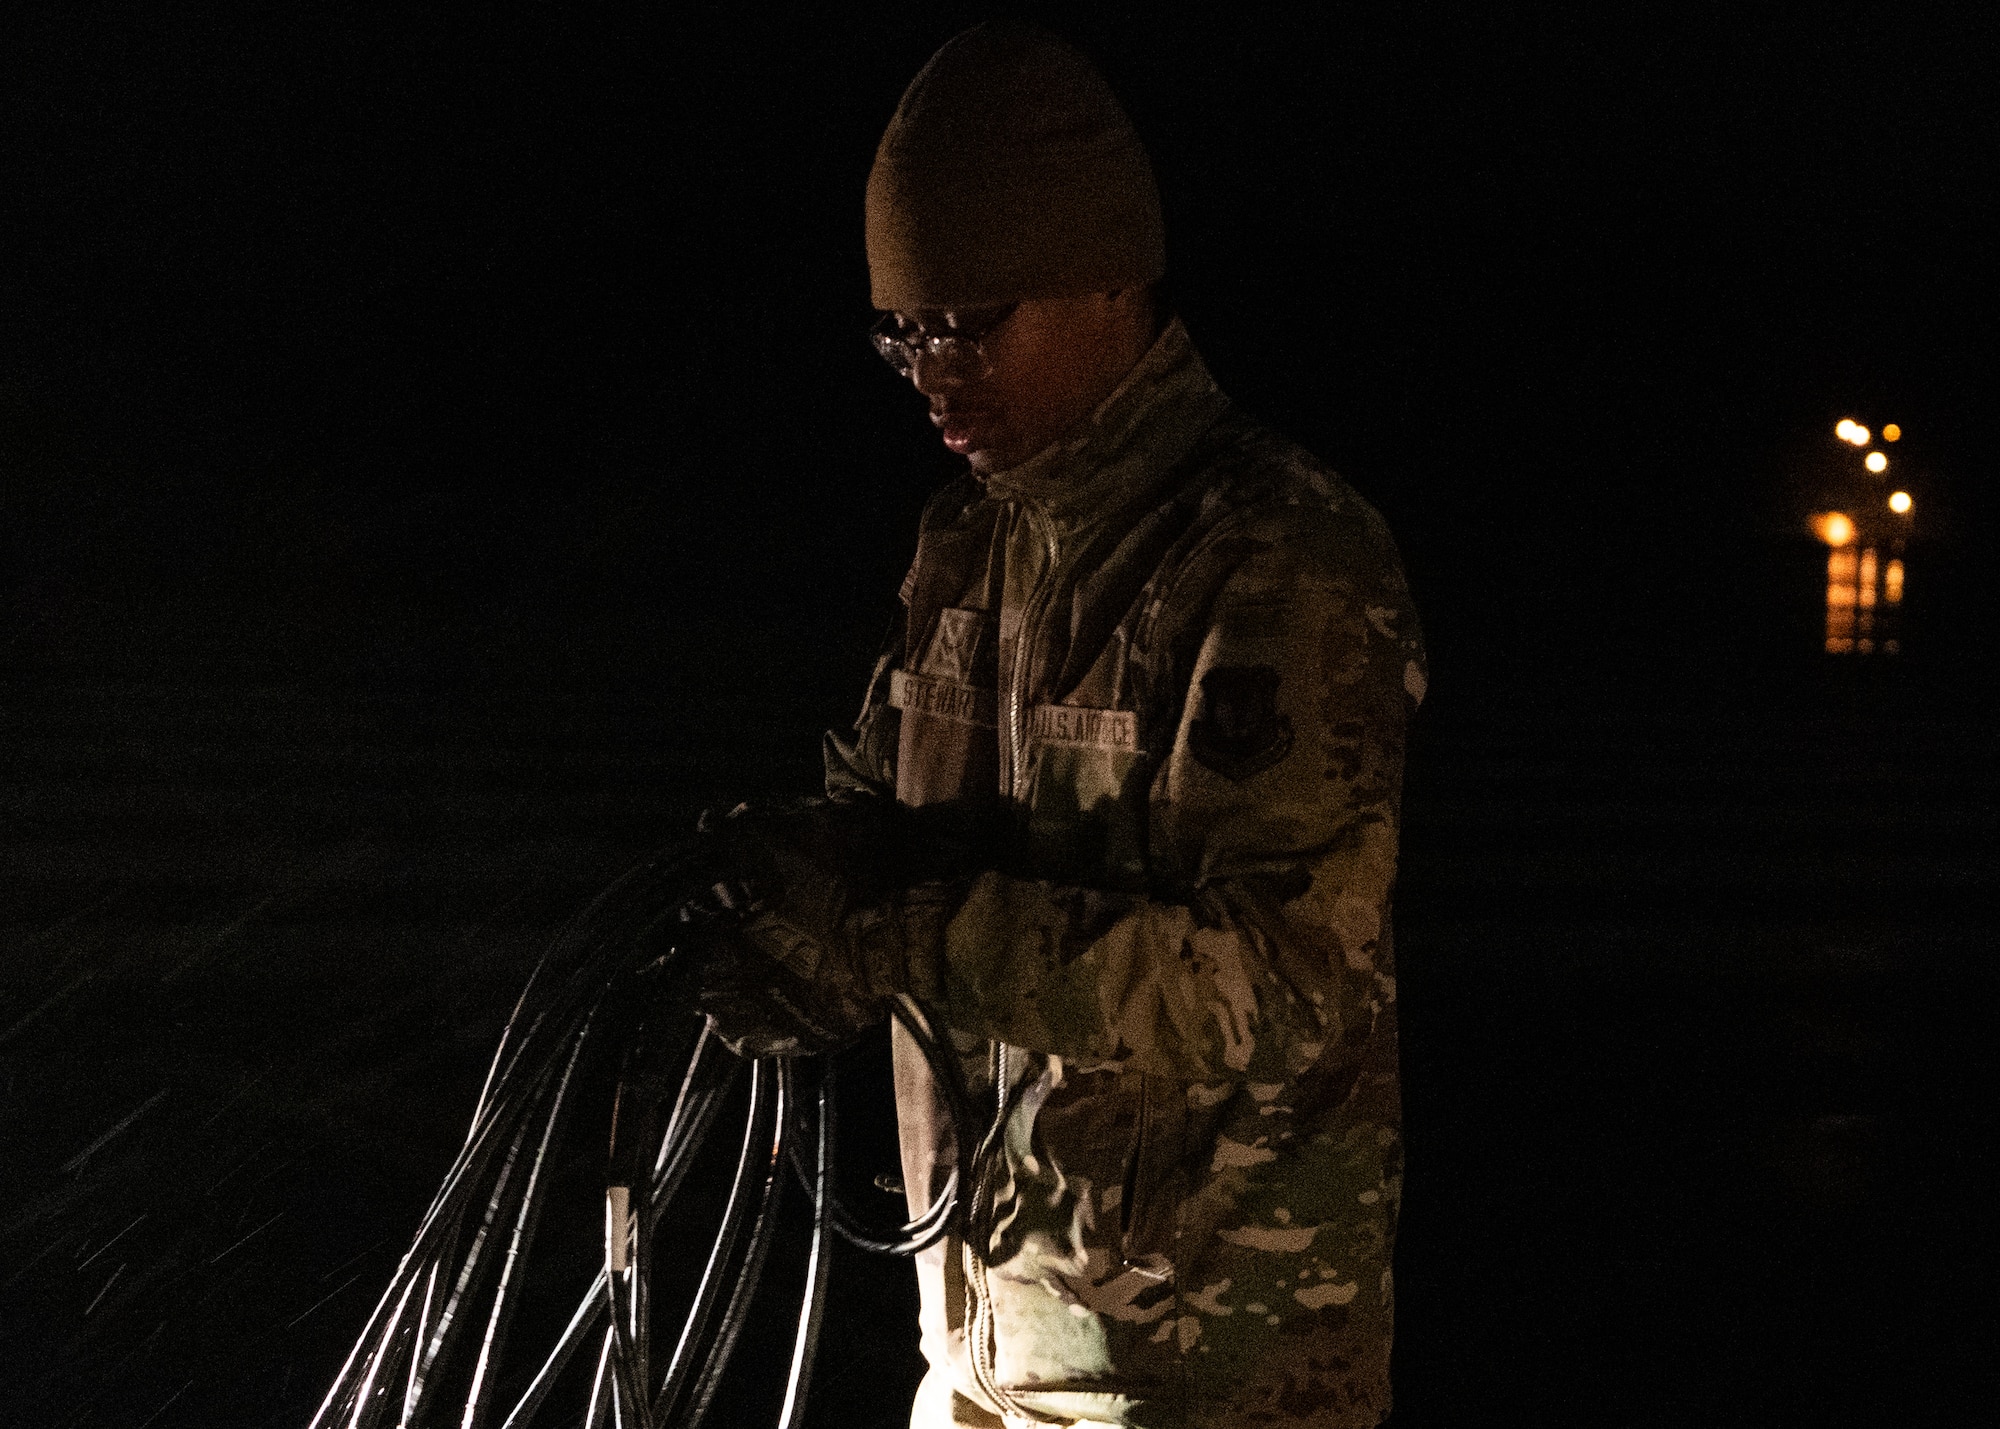 An Airmen holds a group of cables together at night.